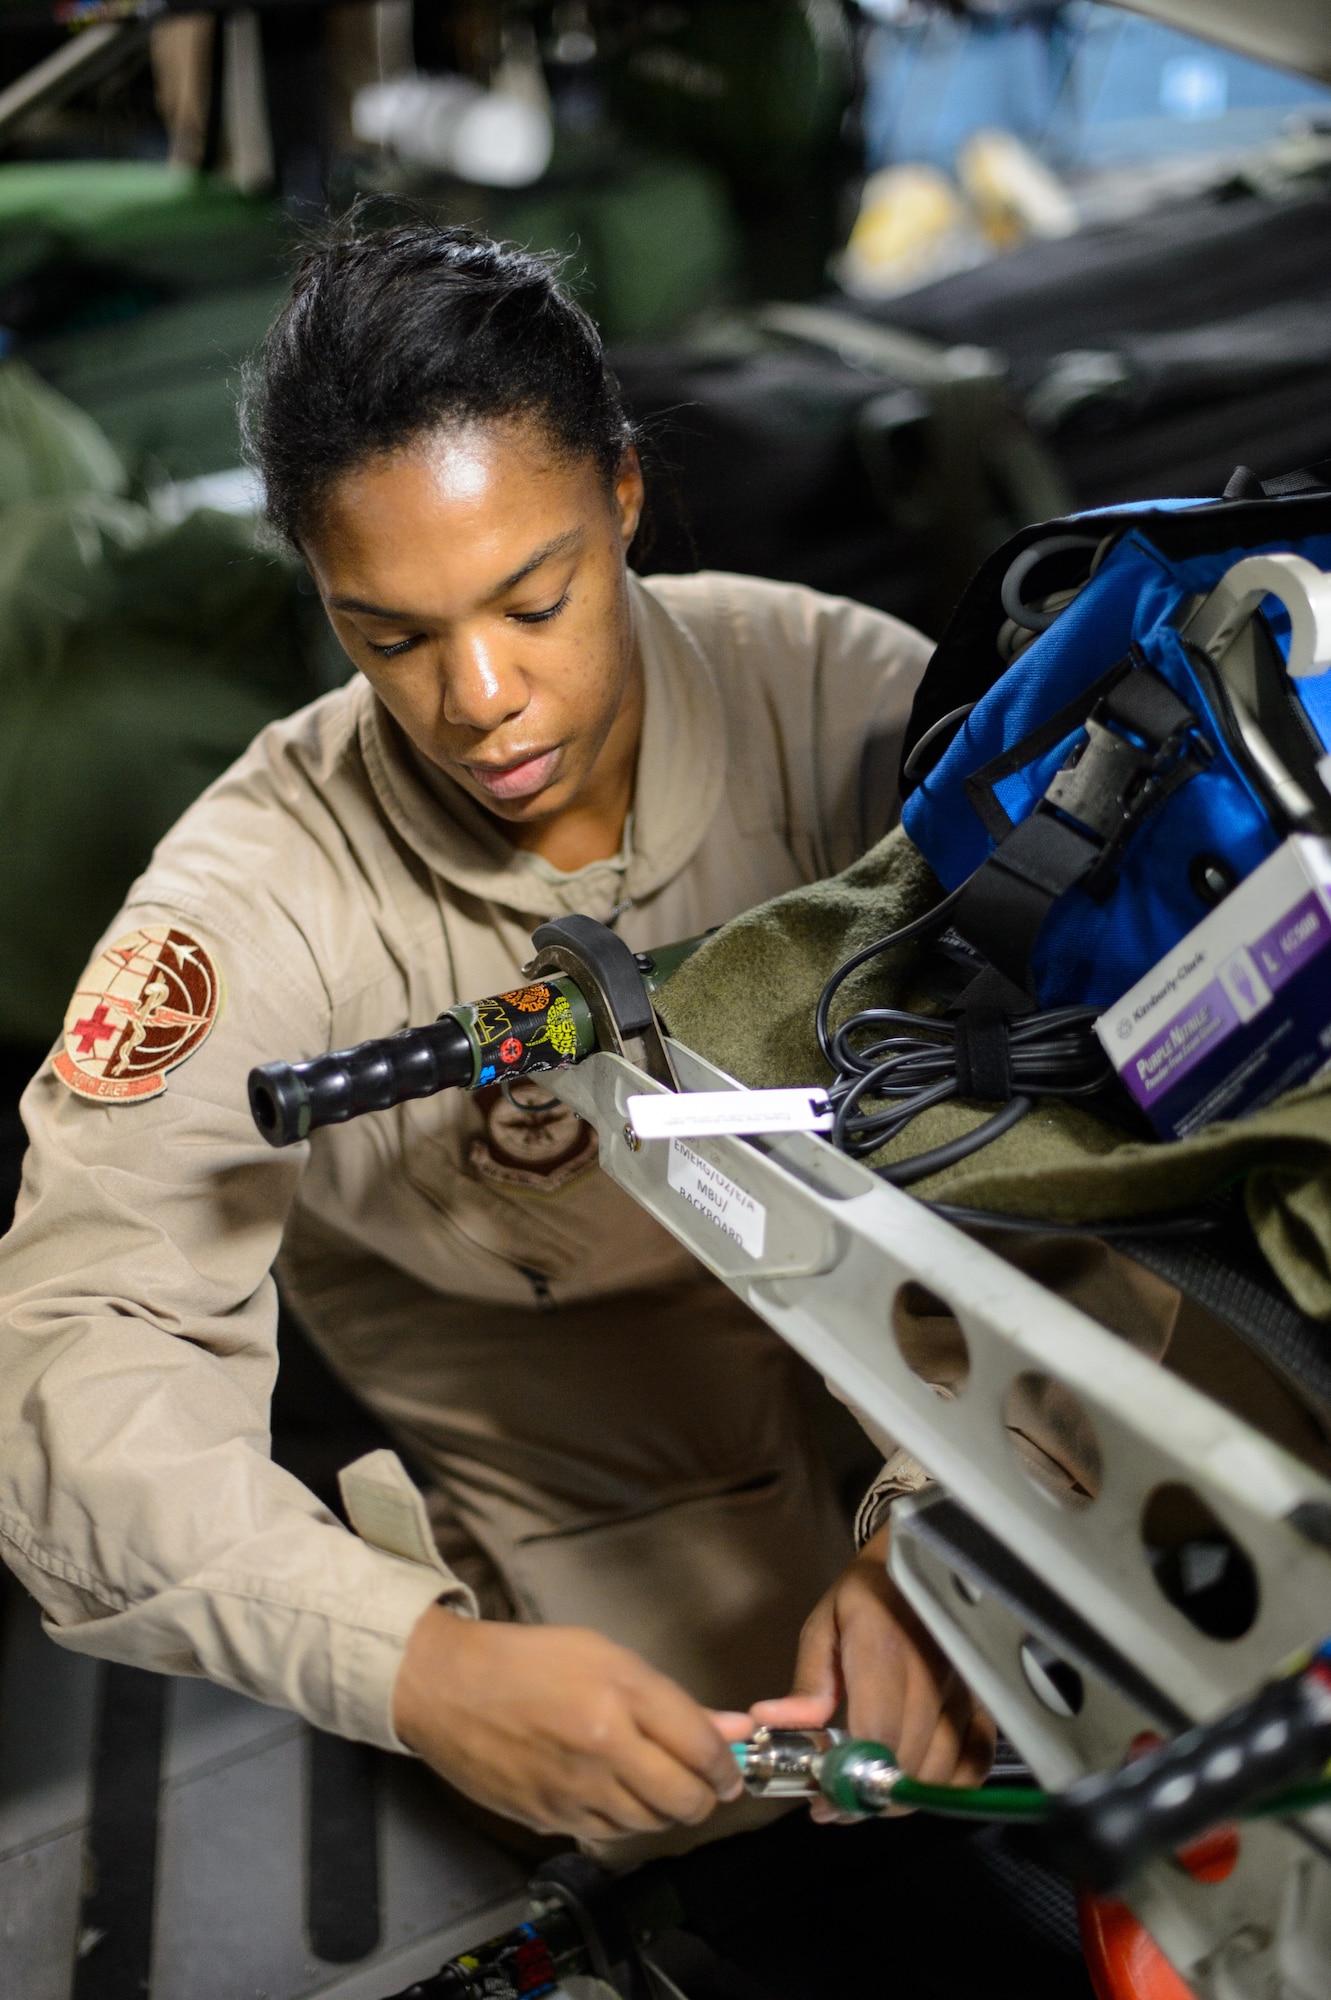 Master Sgt. Natalia Stockhausen, 10th Expeditionary Aeromedical Evacuation Flight technician, connects medical equipment to a C-17 Globemaster III’s systems Nov. 10, 2015, at Ramstein Air Base, Germany. After configuring the inside of the C-17 Globemaster III into a flying ambulance, the Airmen test their equipment to ensure they can provide the best possible treatment while flying thousands of feet in the air. The 10th EAEF is a mixture of active-duty, reserve and guard Airmen deployed to Ramstein, constantly flying to war zones to retrieve patients needing higher levels of medical care. (U.S. Air Force photo/Staff Sgt. Armando A. Schwier-Morales)